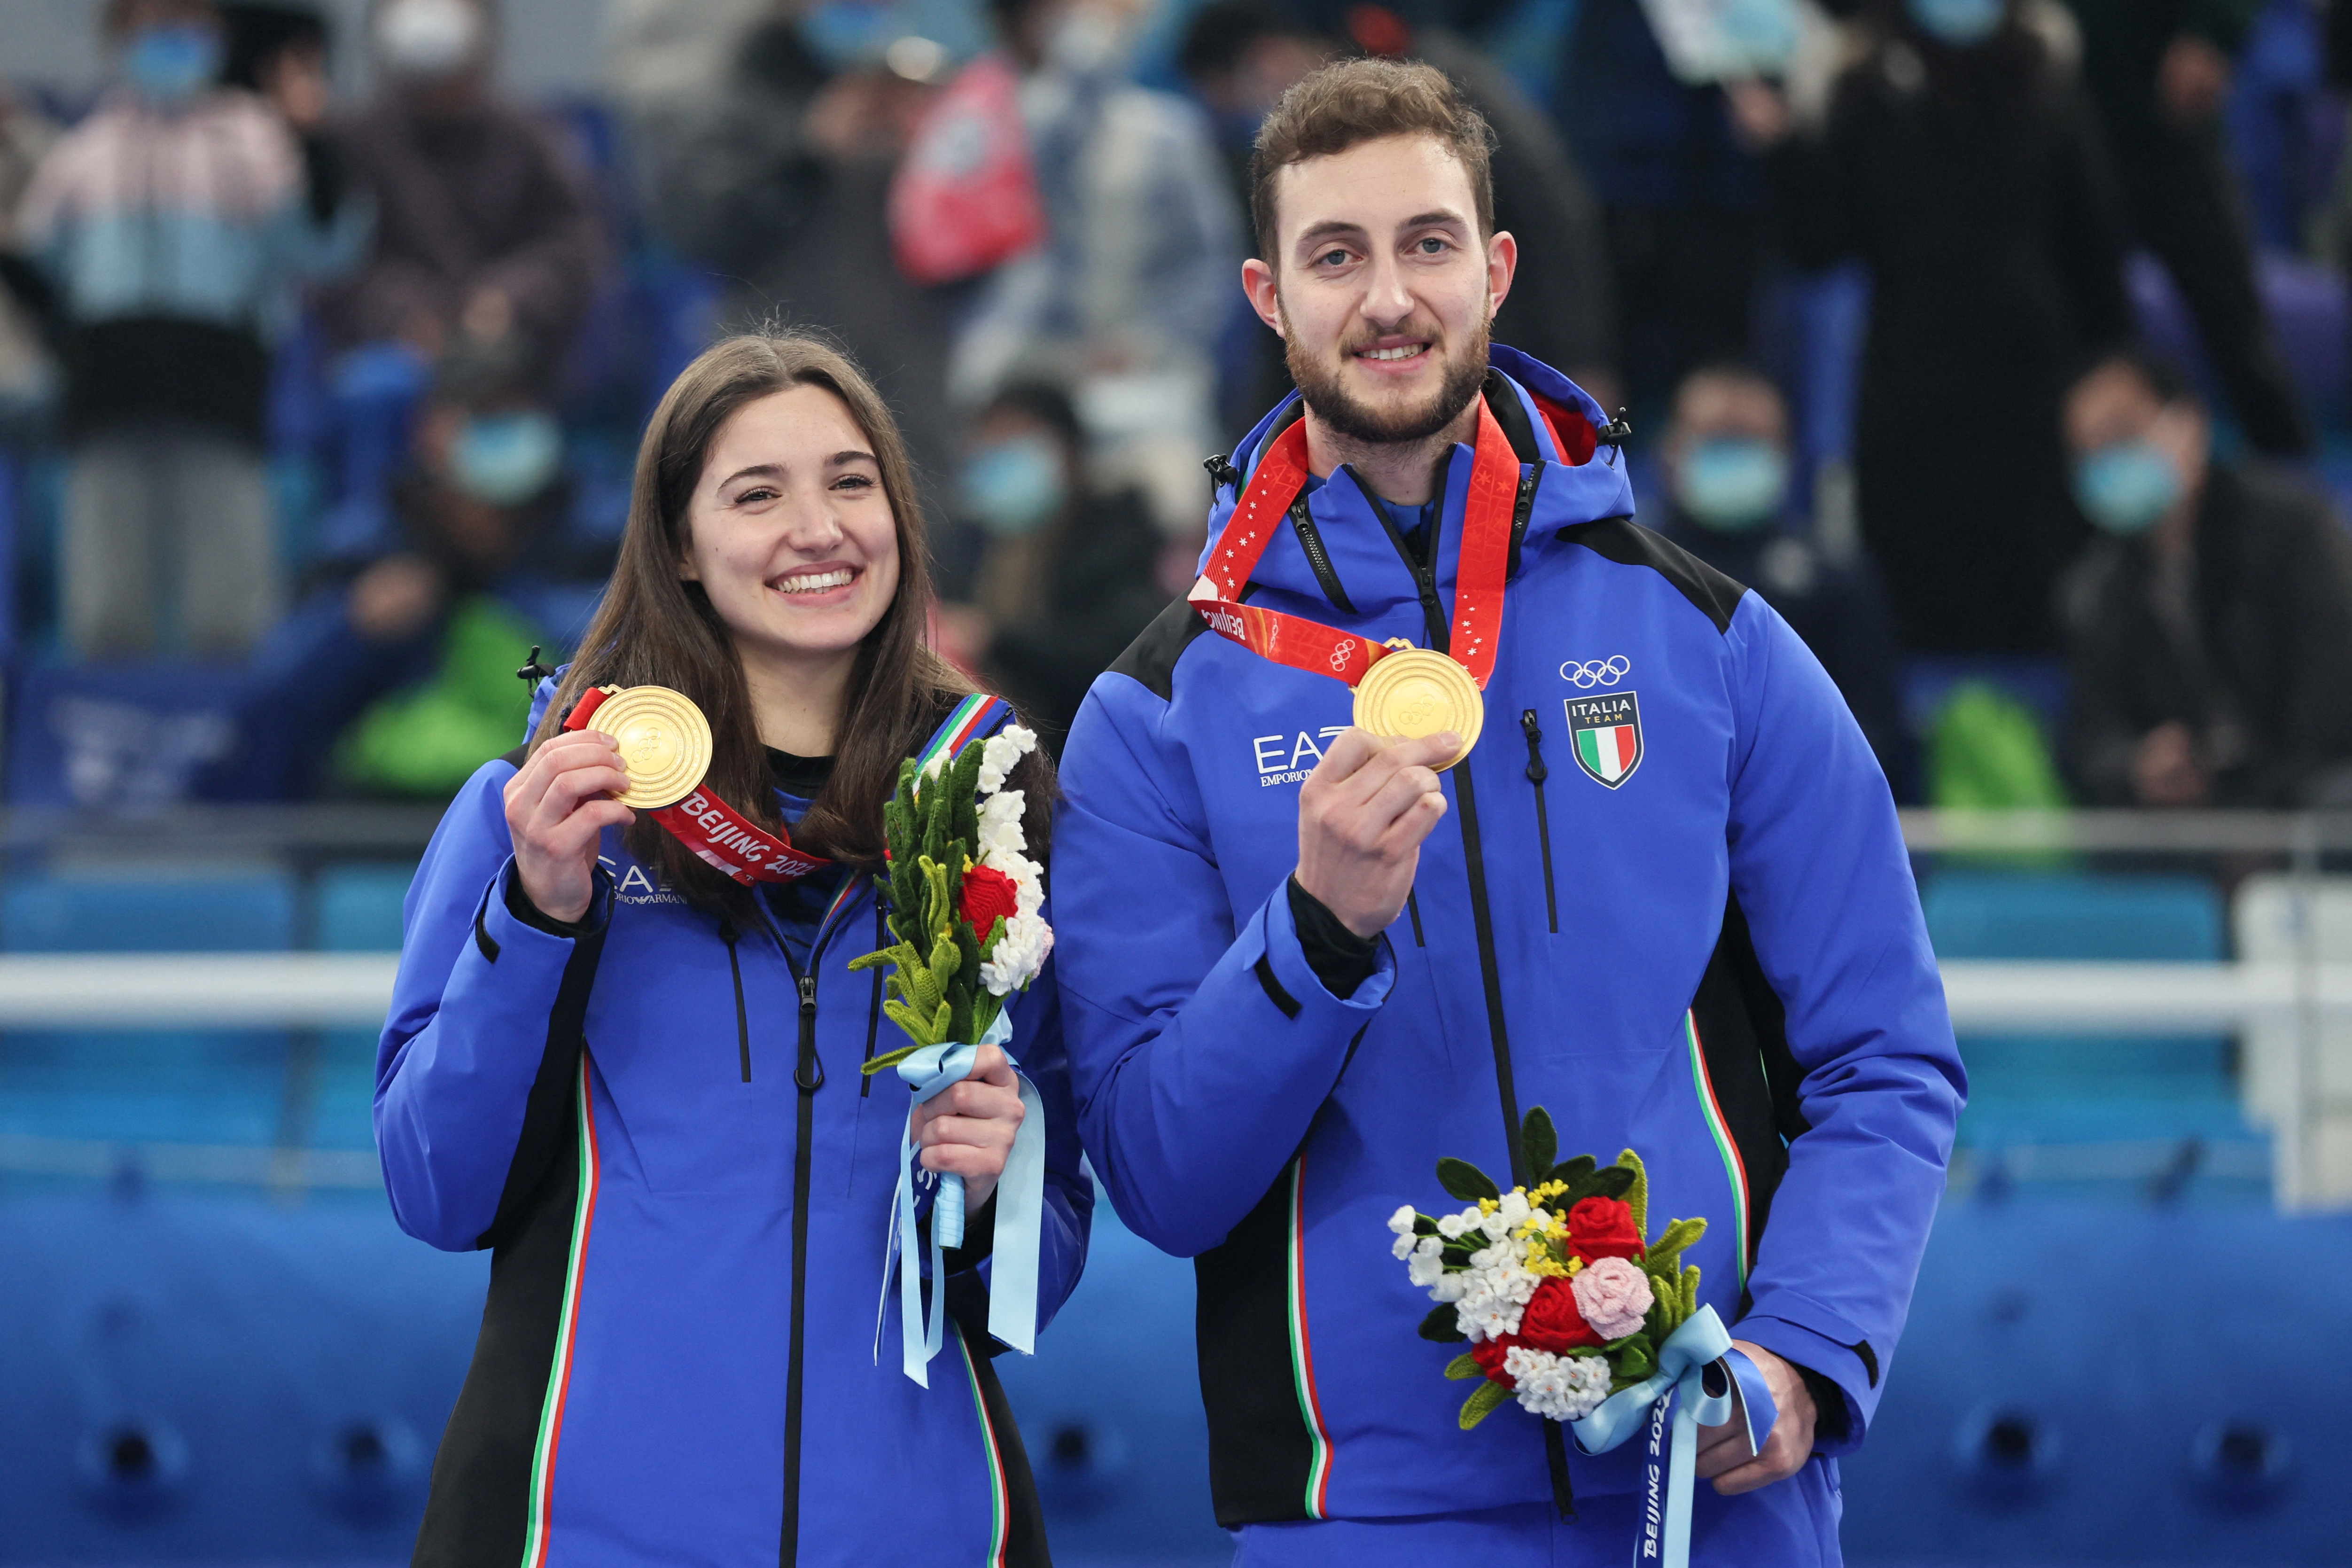 Curling-Italians hope to inspire nation in build-up to home Games